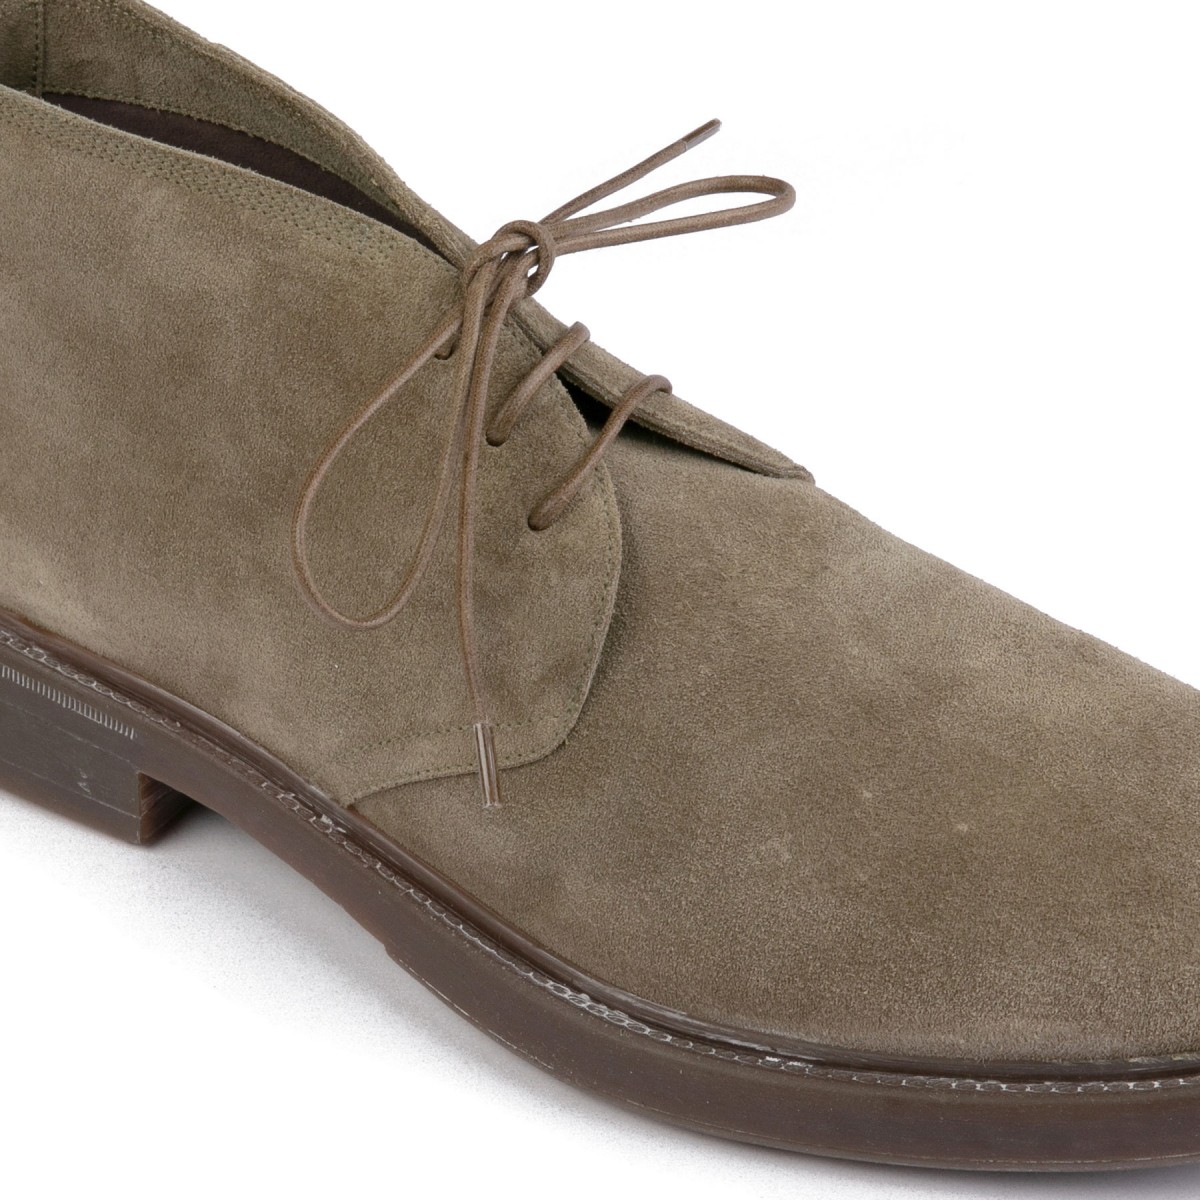 Taupe suede chukka boots